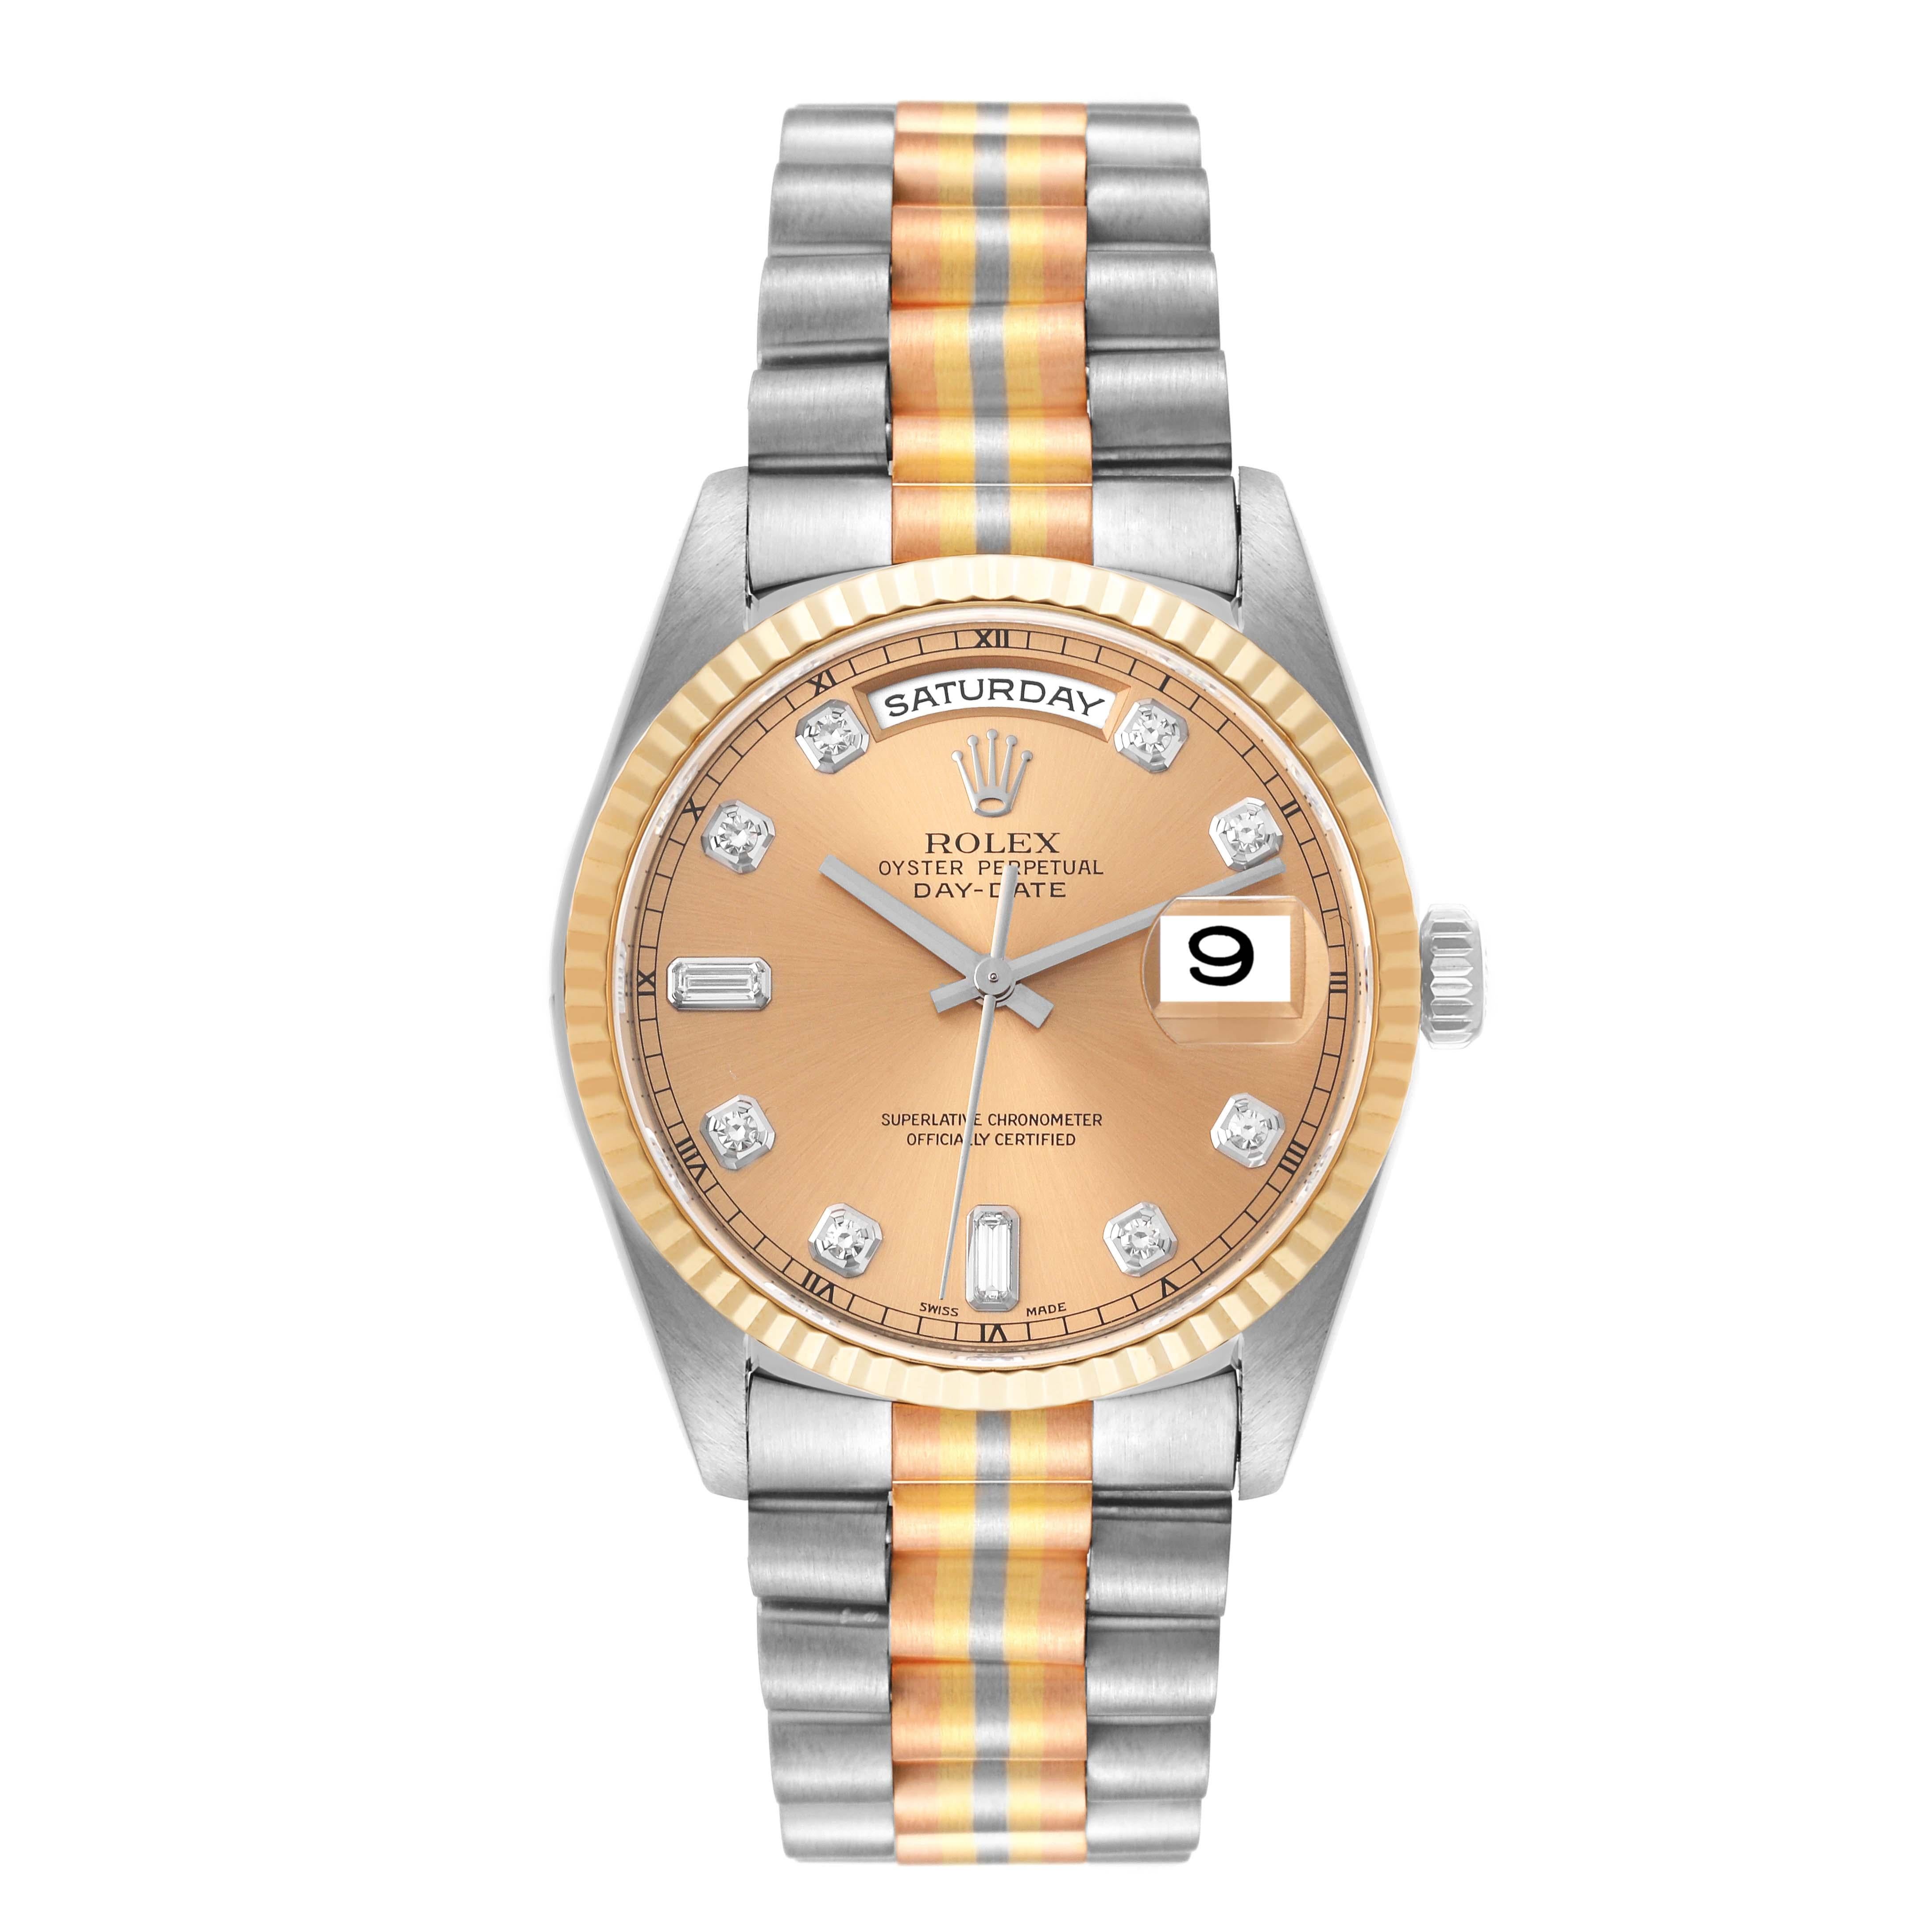 Rolex President Day-Date Tridor White Yellow Rose Gold Diamond Mens Watch 18239. Officially certified chronometer self-winding movement with quickset date function. 18k white gold oyster case 36.0 mm in diameter. Rolex logo on a crown. 18k yellow